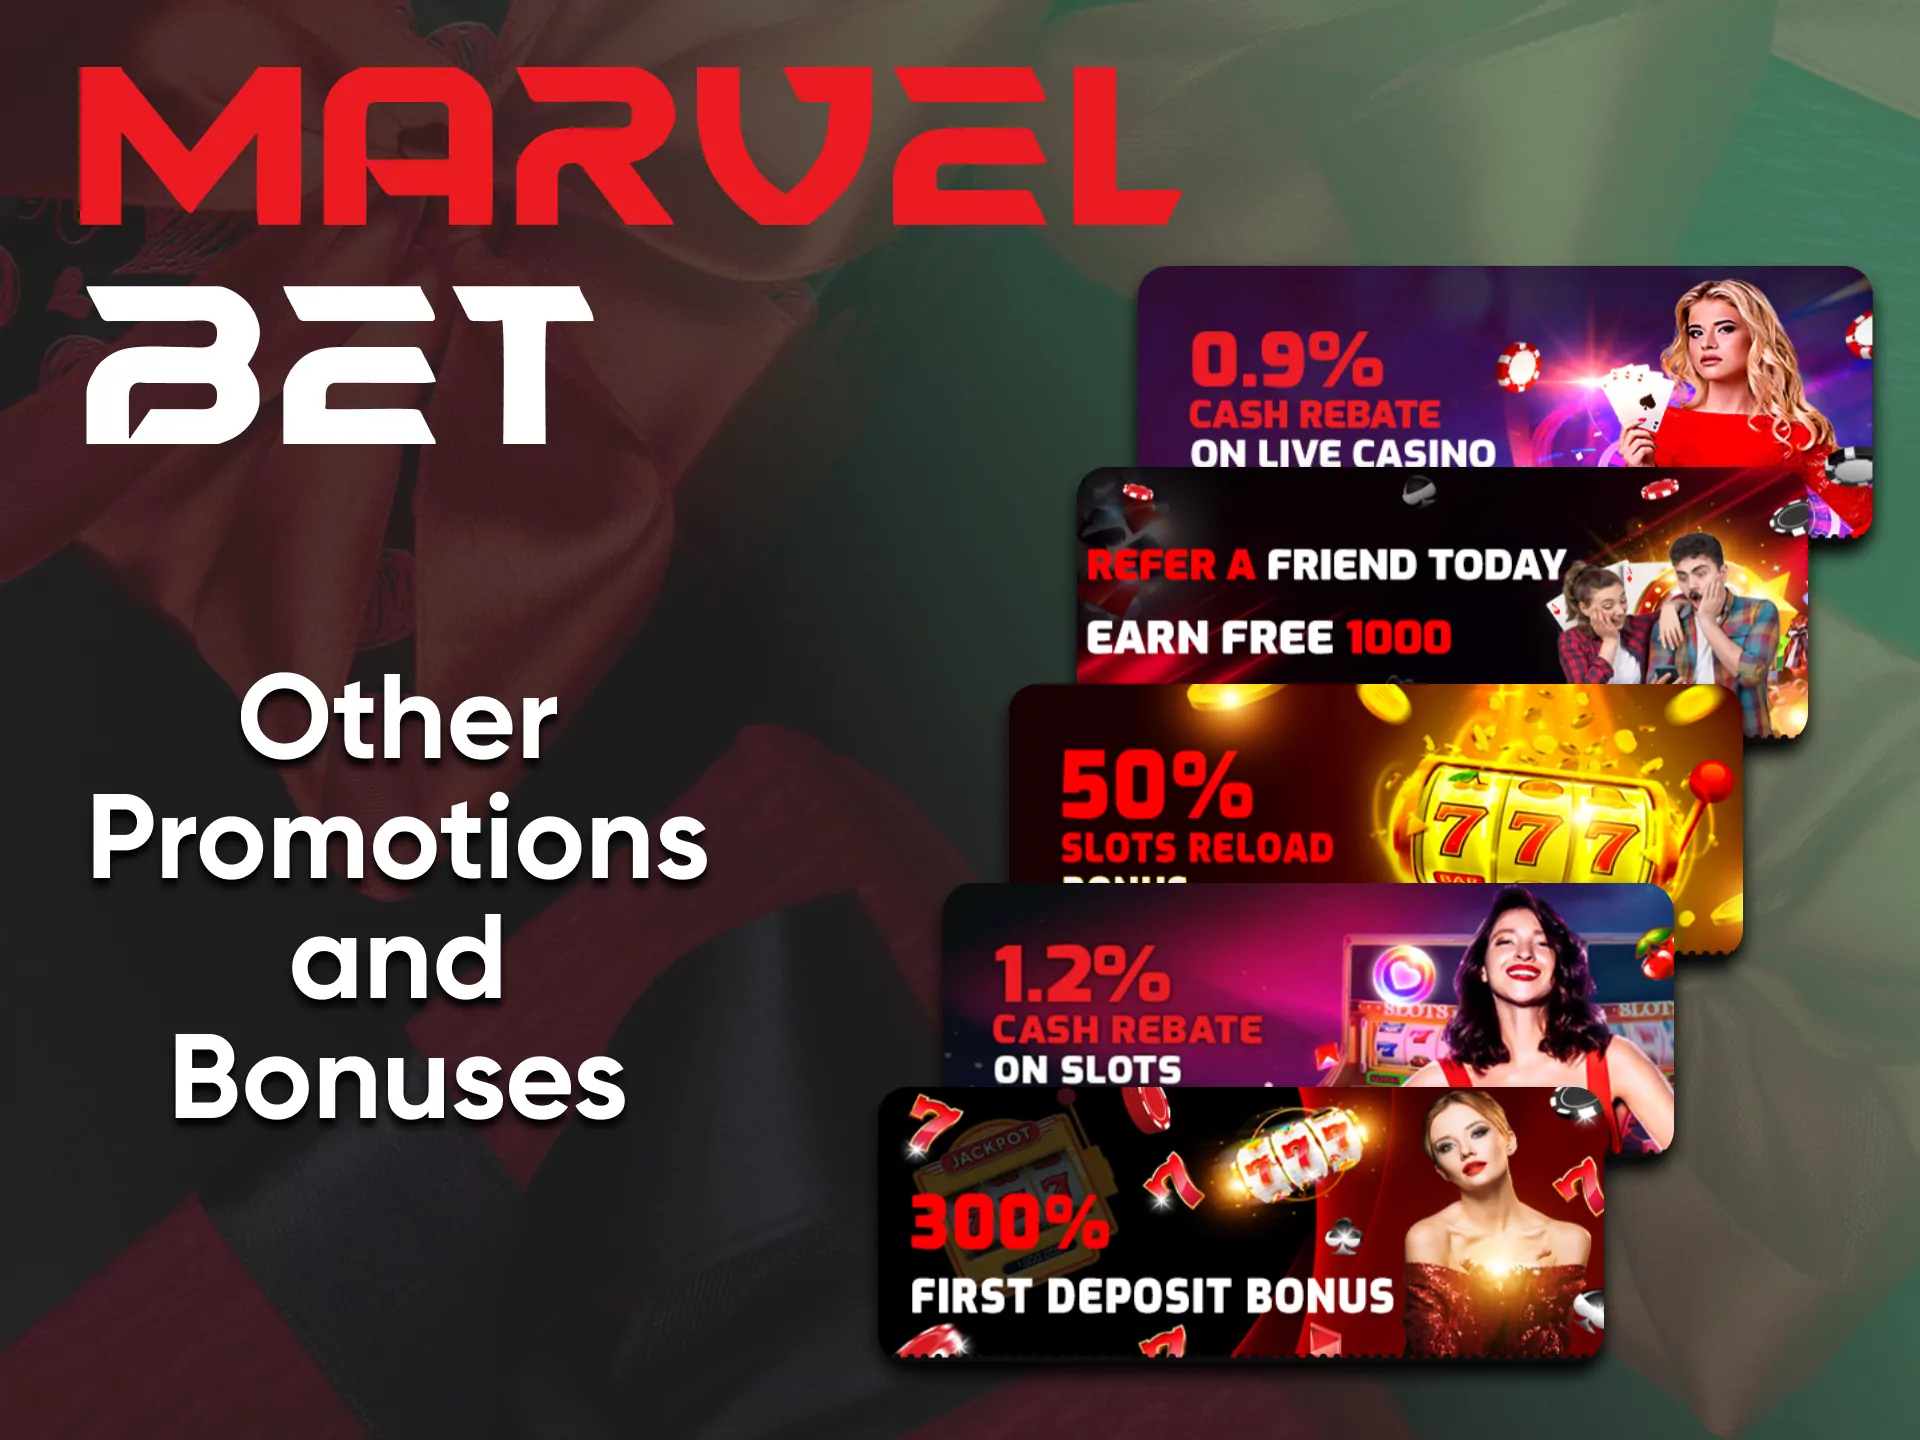 Play at the casino and get a bonus from Marvelbet.